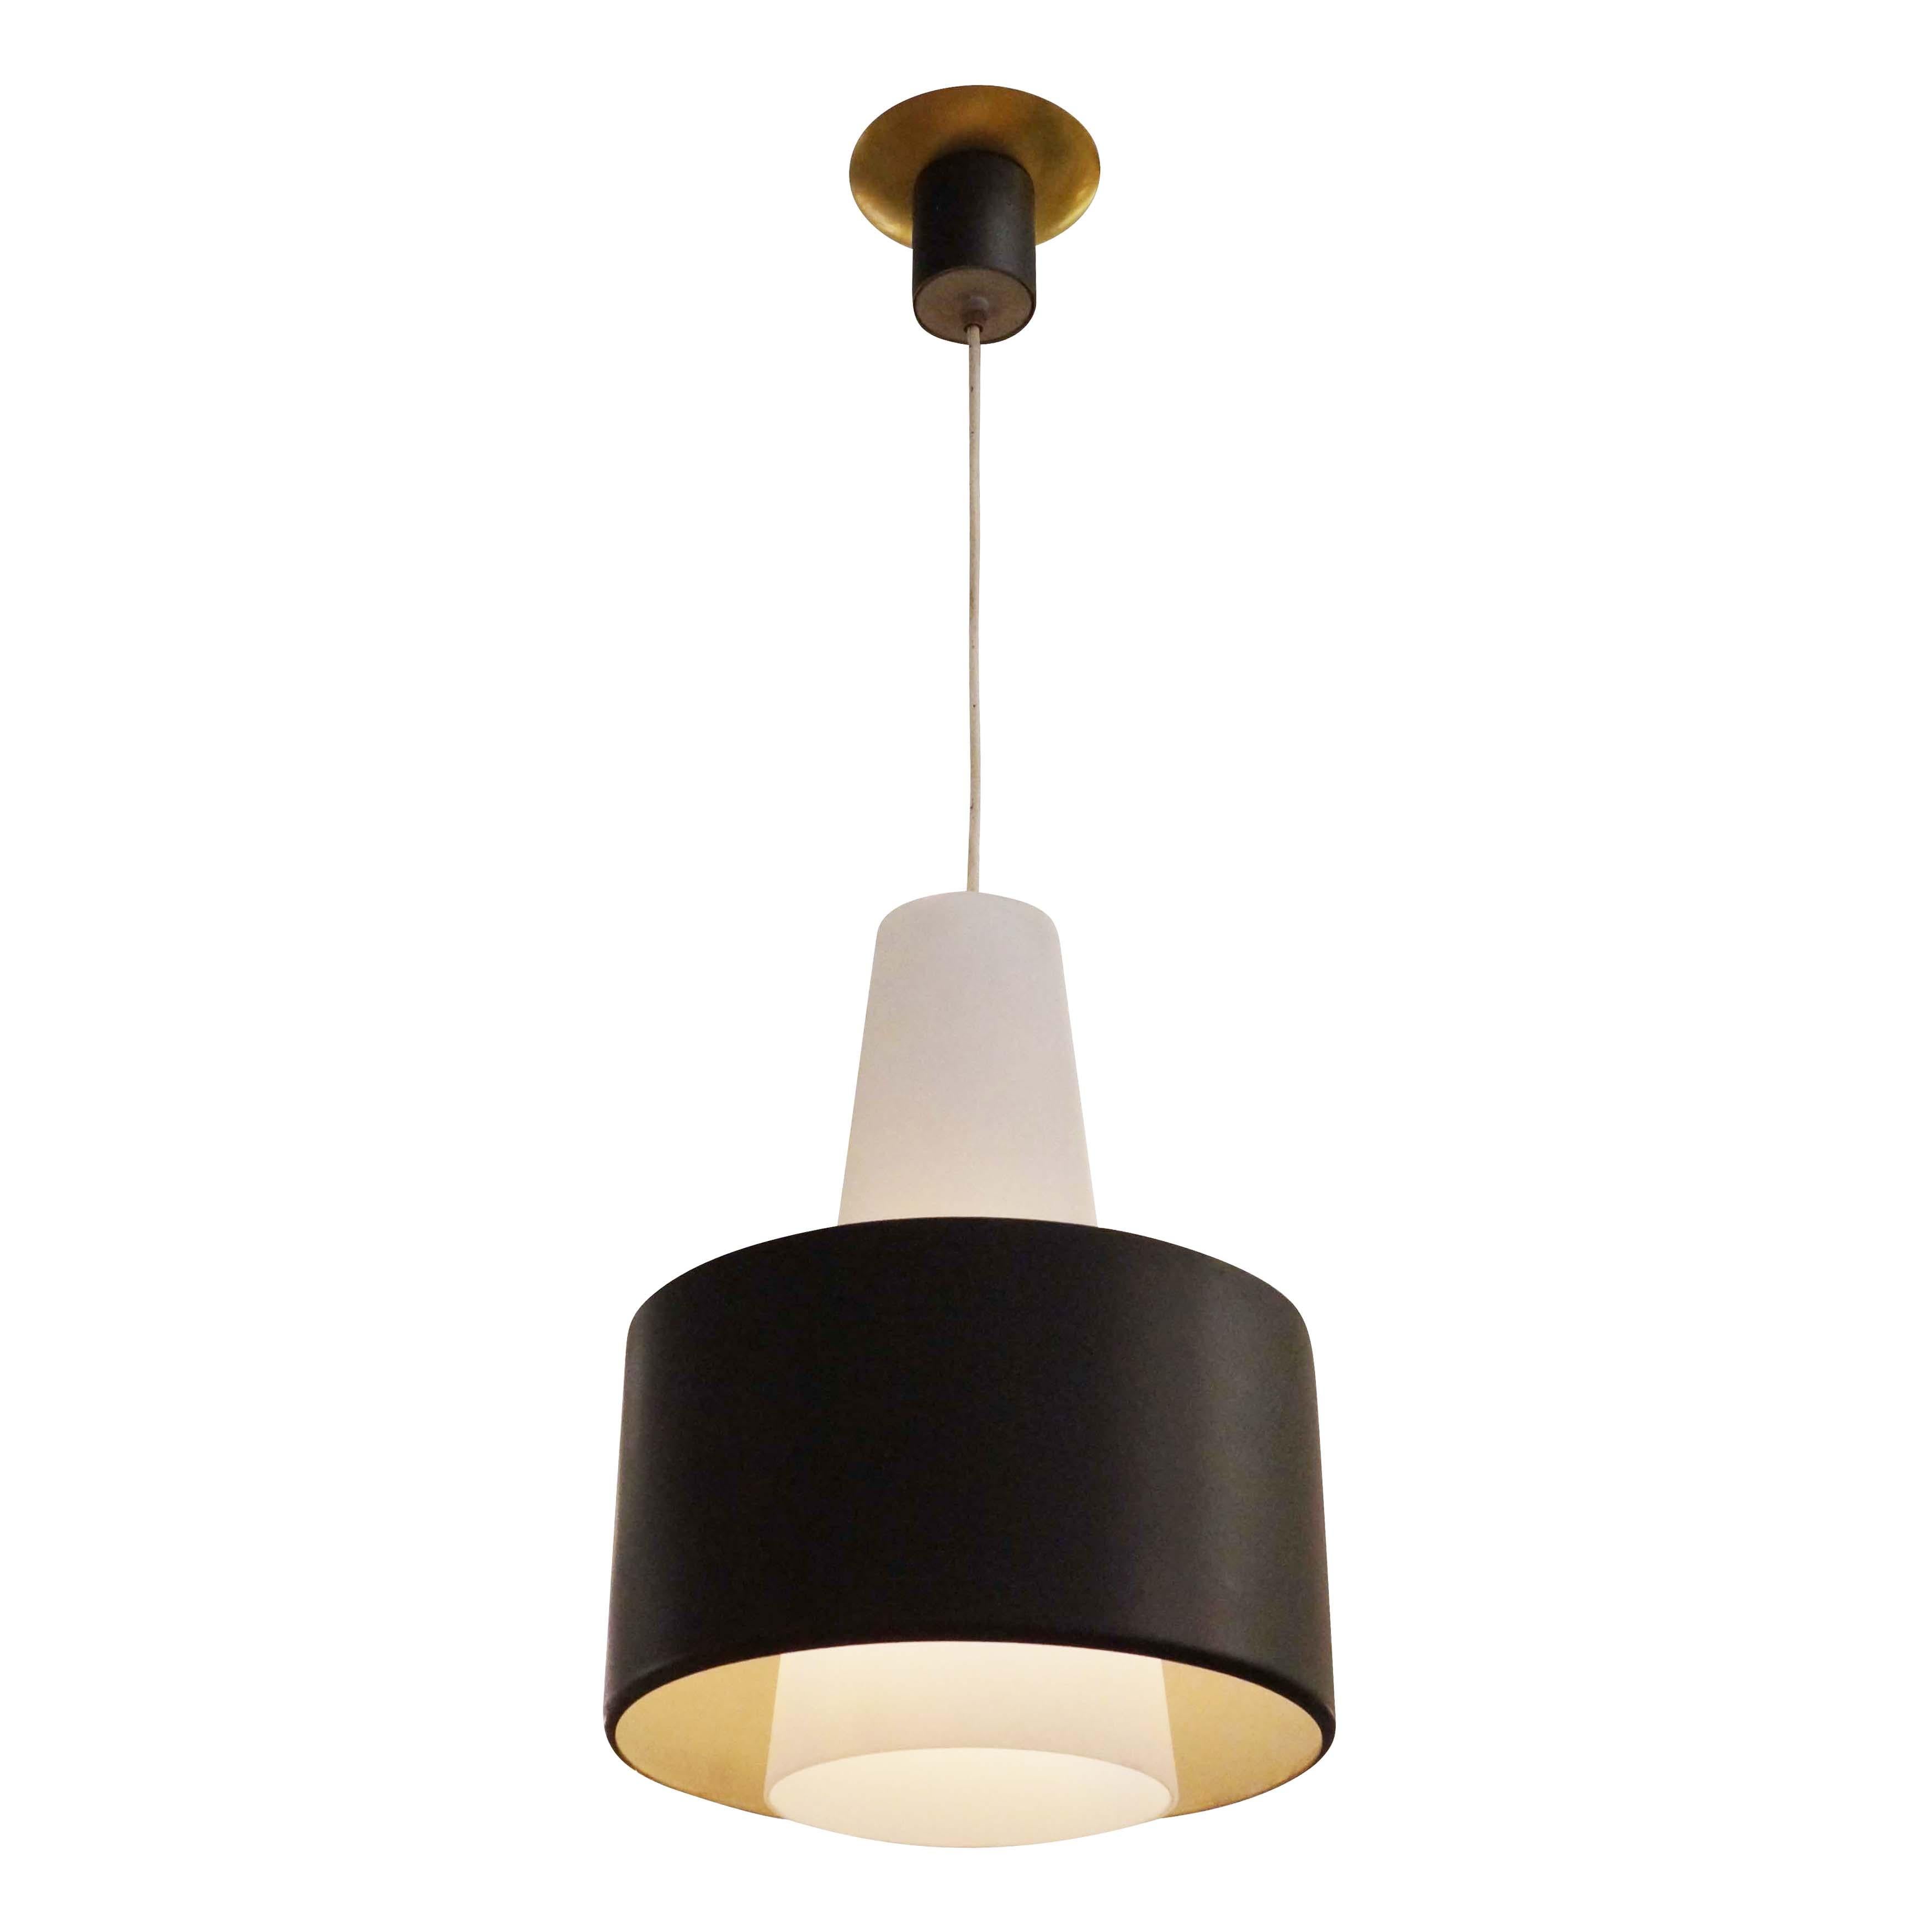 Italian Mid-Century pendant by Stilnovo with a frosted glass diffuser and black and white shade. One light source.

Condition: Excellent vintage condition, minor wear consistent with age and use.

Diameter: 11”

Height: 32” (adjustable) 

Ref#: